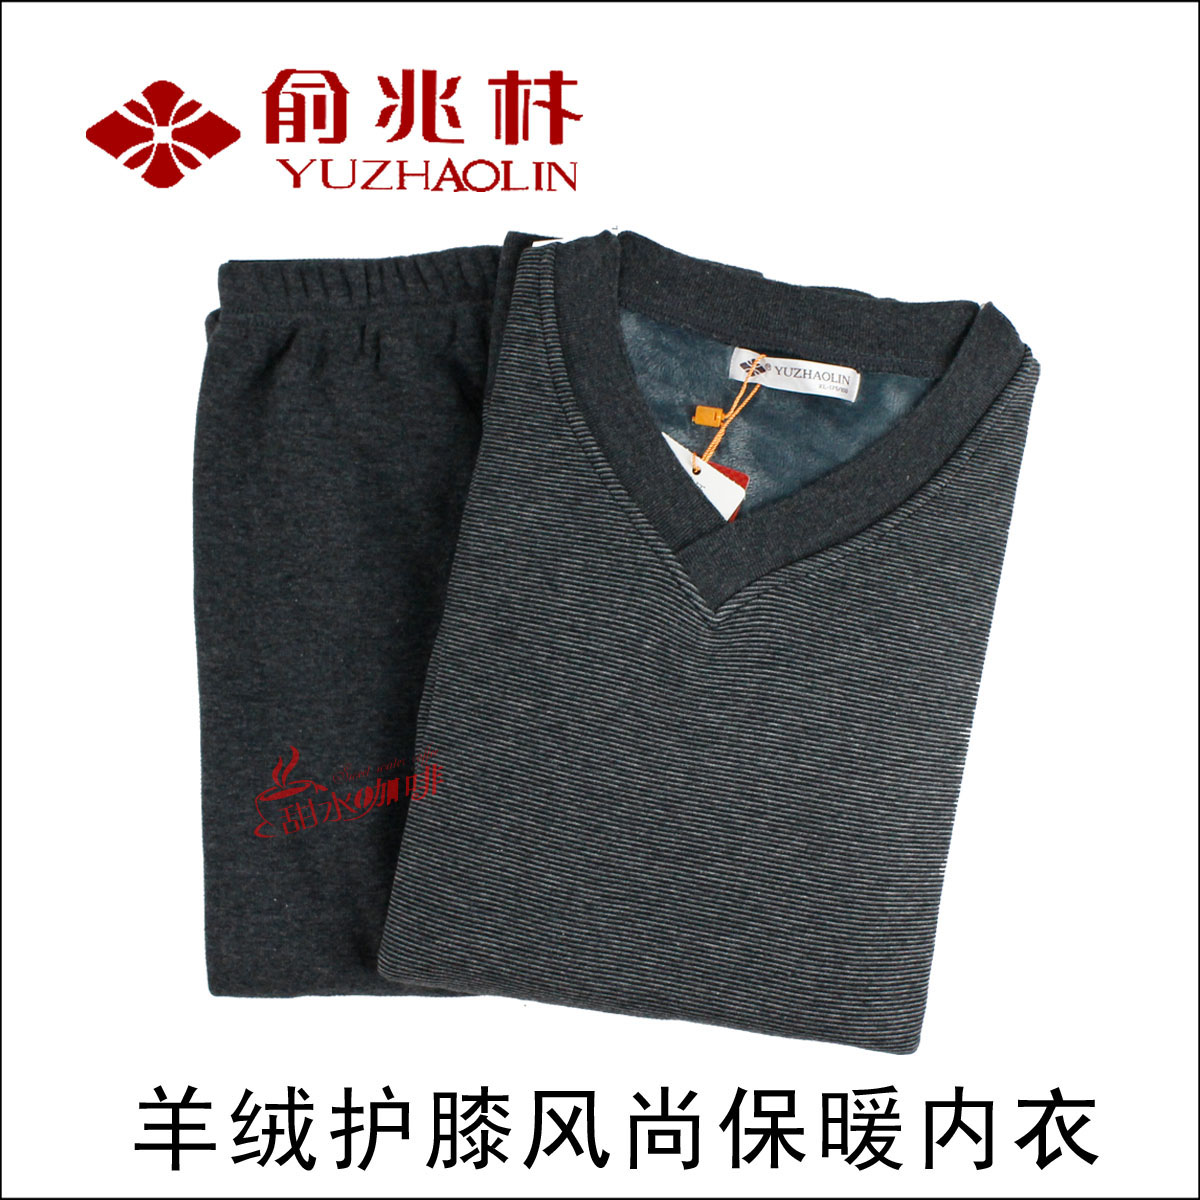 Male V-neck cashmere kneepad thermal underwear set men's thermal clothing 8706